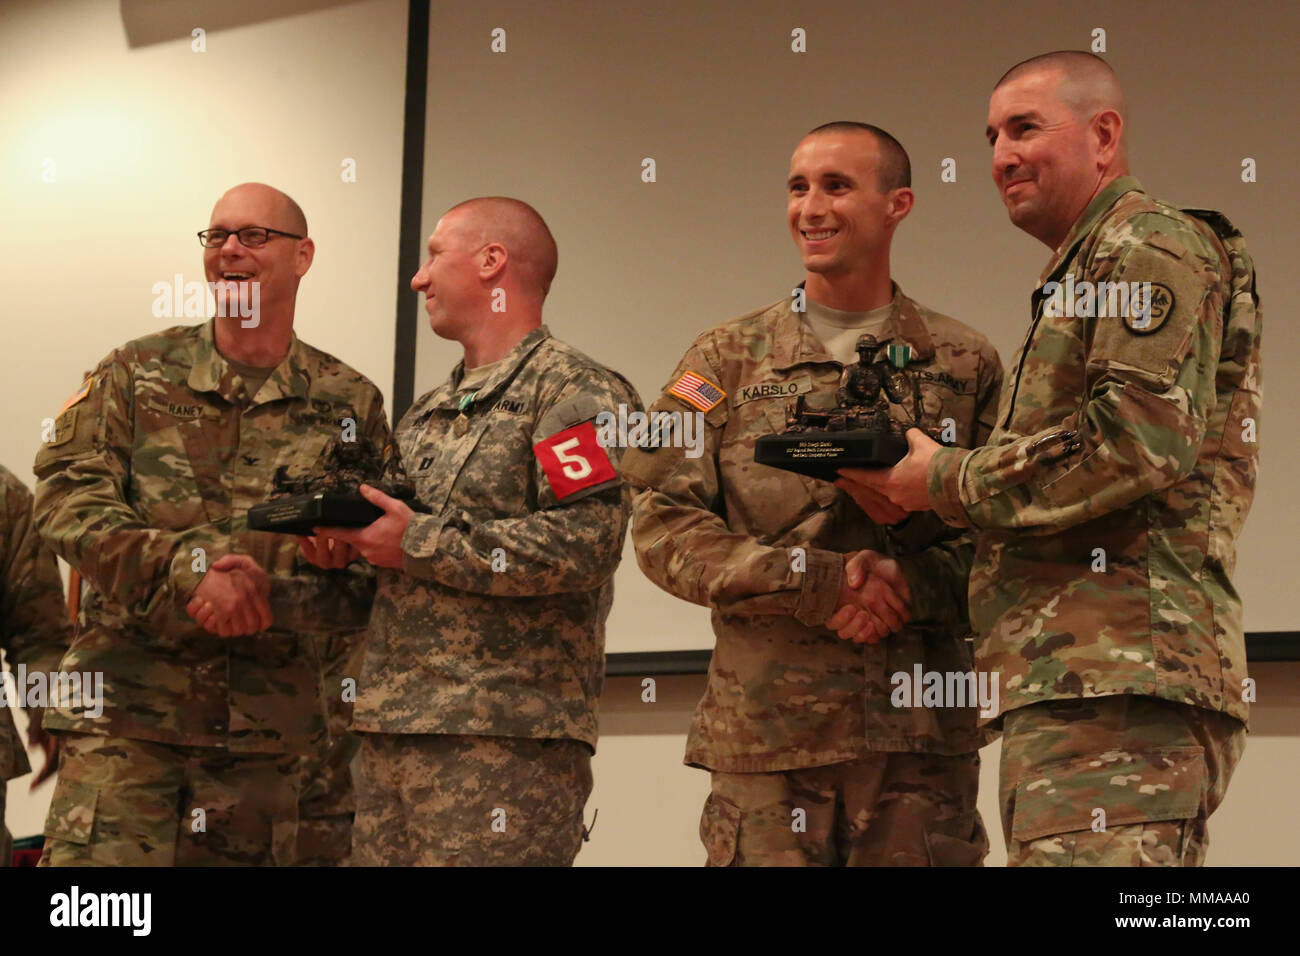 U.S. Army Capt. Jeremy Lewis and Staff Sgt. Joseph Karslo, assigned Public Health Command, receive awards during the 2017 Best Medic Competition Award Ceremony at Fort Bragg, N.C., Sept. 20, 2017. The competition tested the physical and mental toughness, as well as the technical competence, of each medic to identify the team moving forward to represent the region at the next level of the competition.  (U.S. Army photo by Pfc. Meleesa Gutierrez) Stock Photo